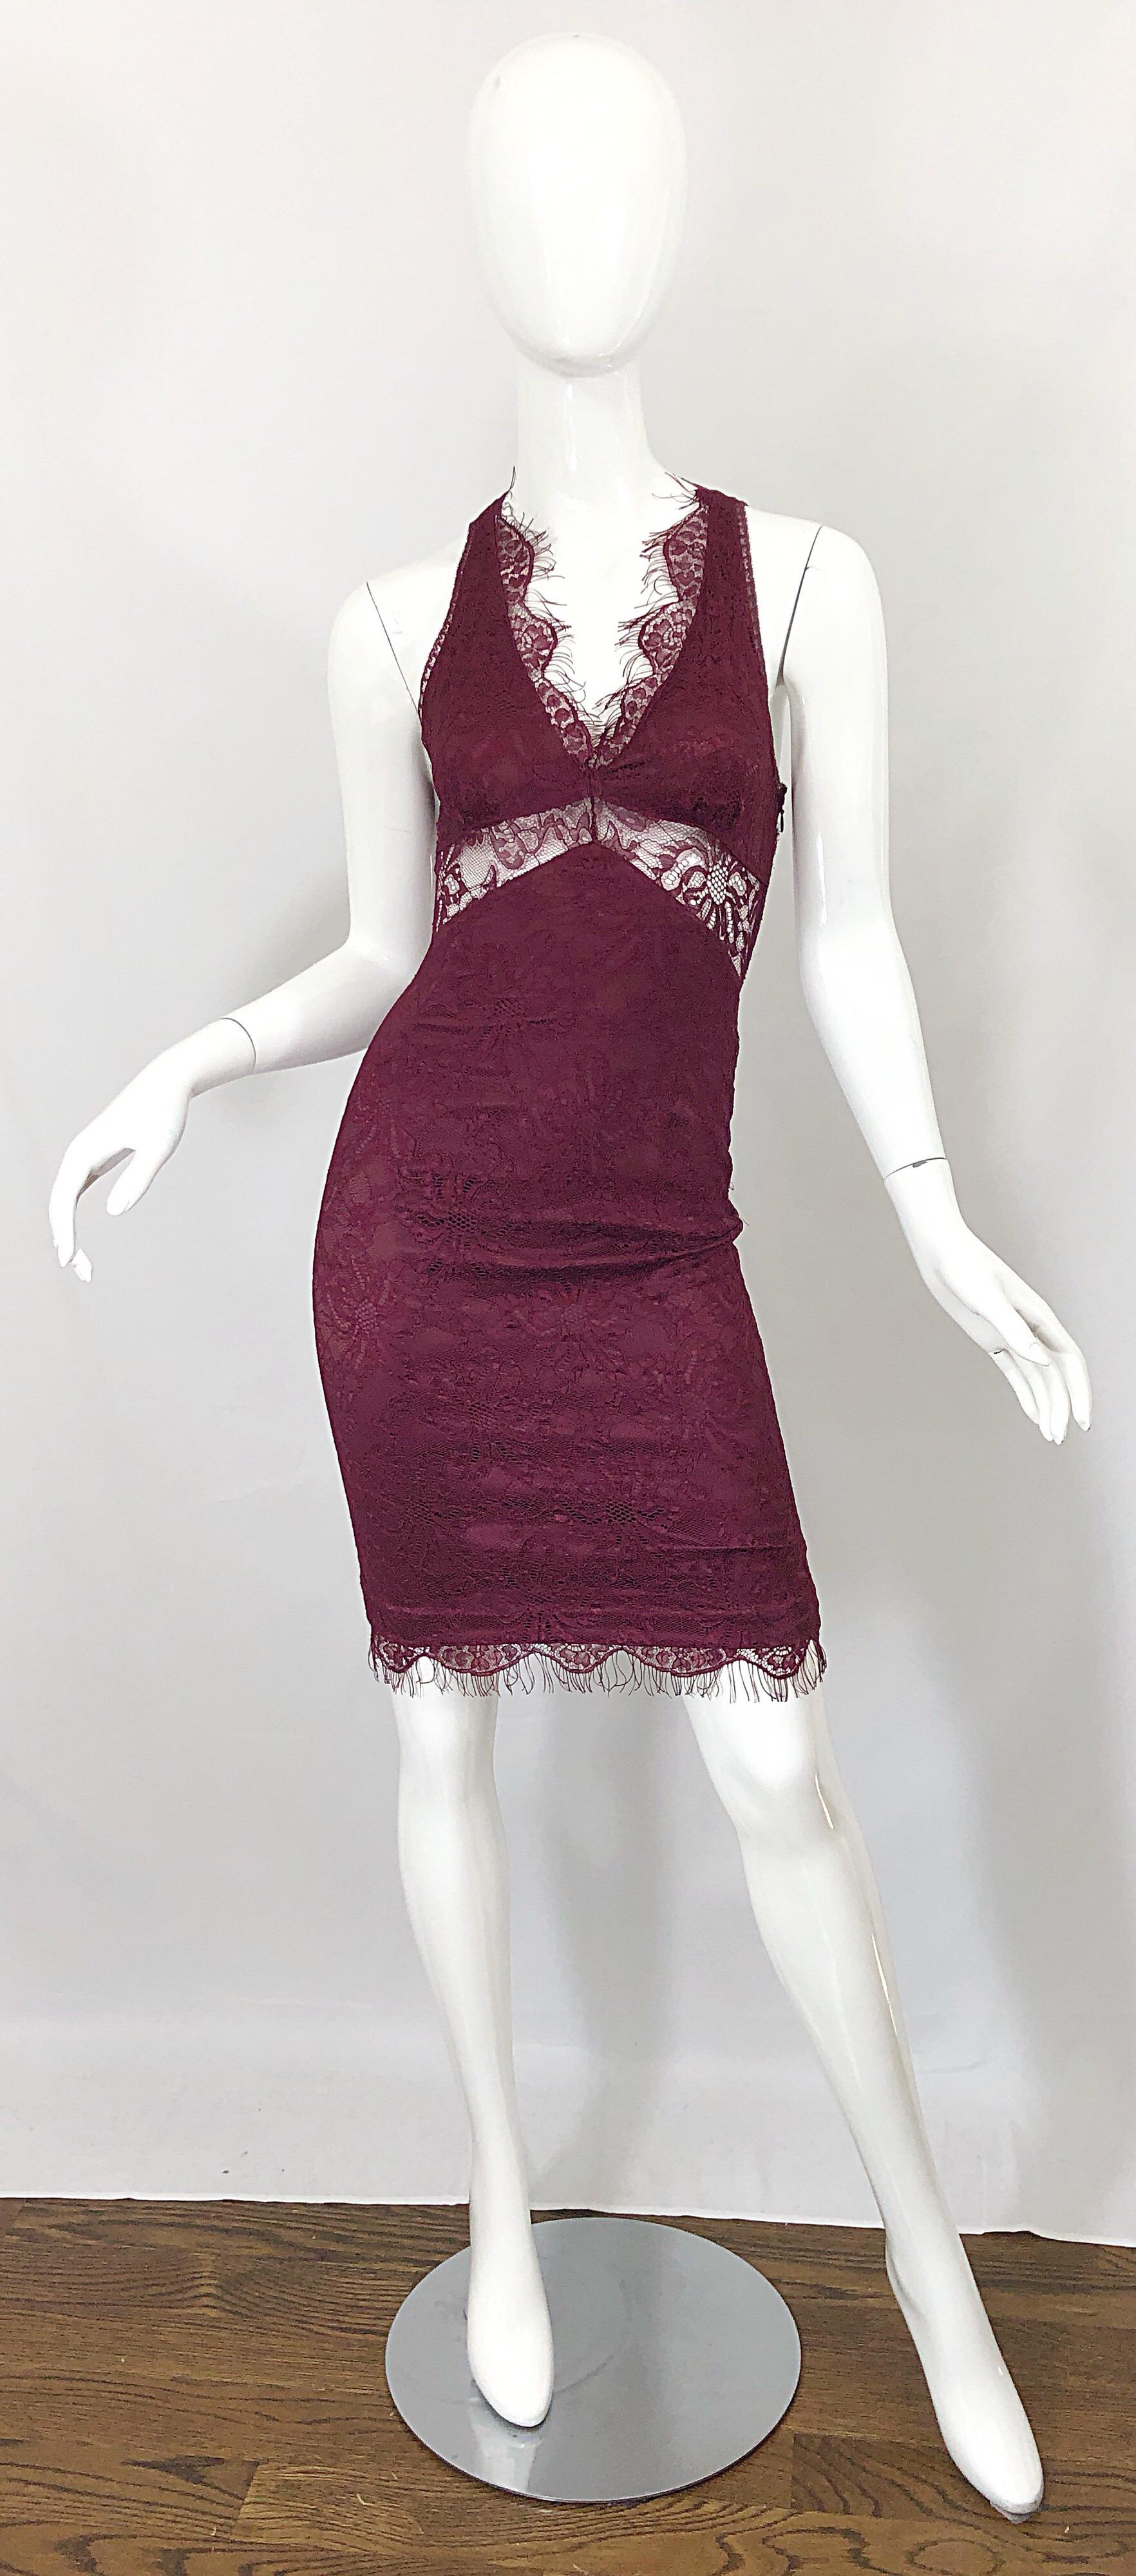 Sexy late 90s D&G by Dolce & Gabbana burgundy / merlot burgundy lace cut-out bodycon dress! Features allover lace, with cut-out below the bust and upper back. Spectacular body hugging fit looks amazing on! Hidden zipper up the side. The perfect